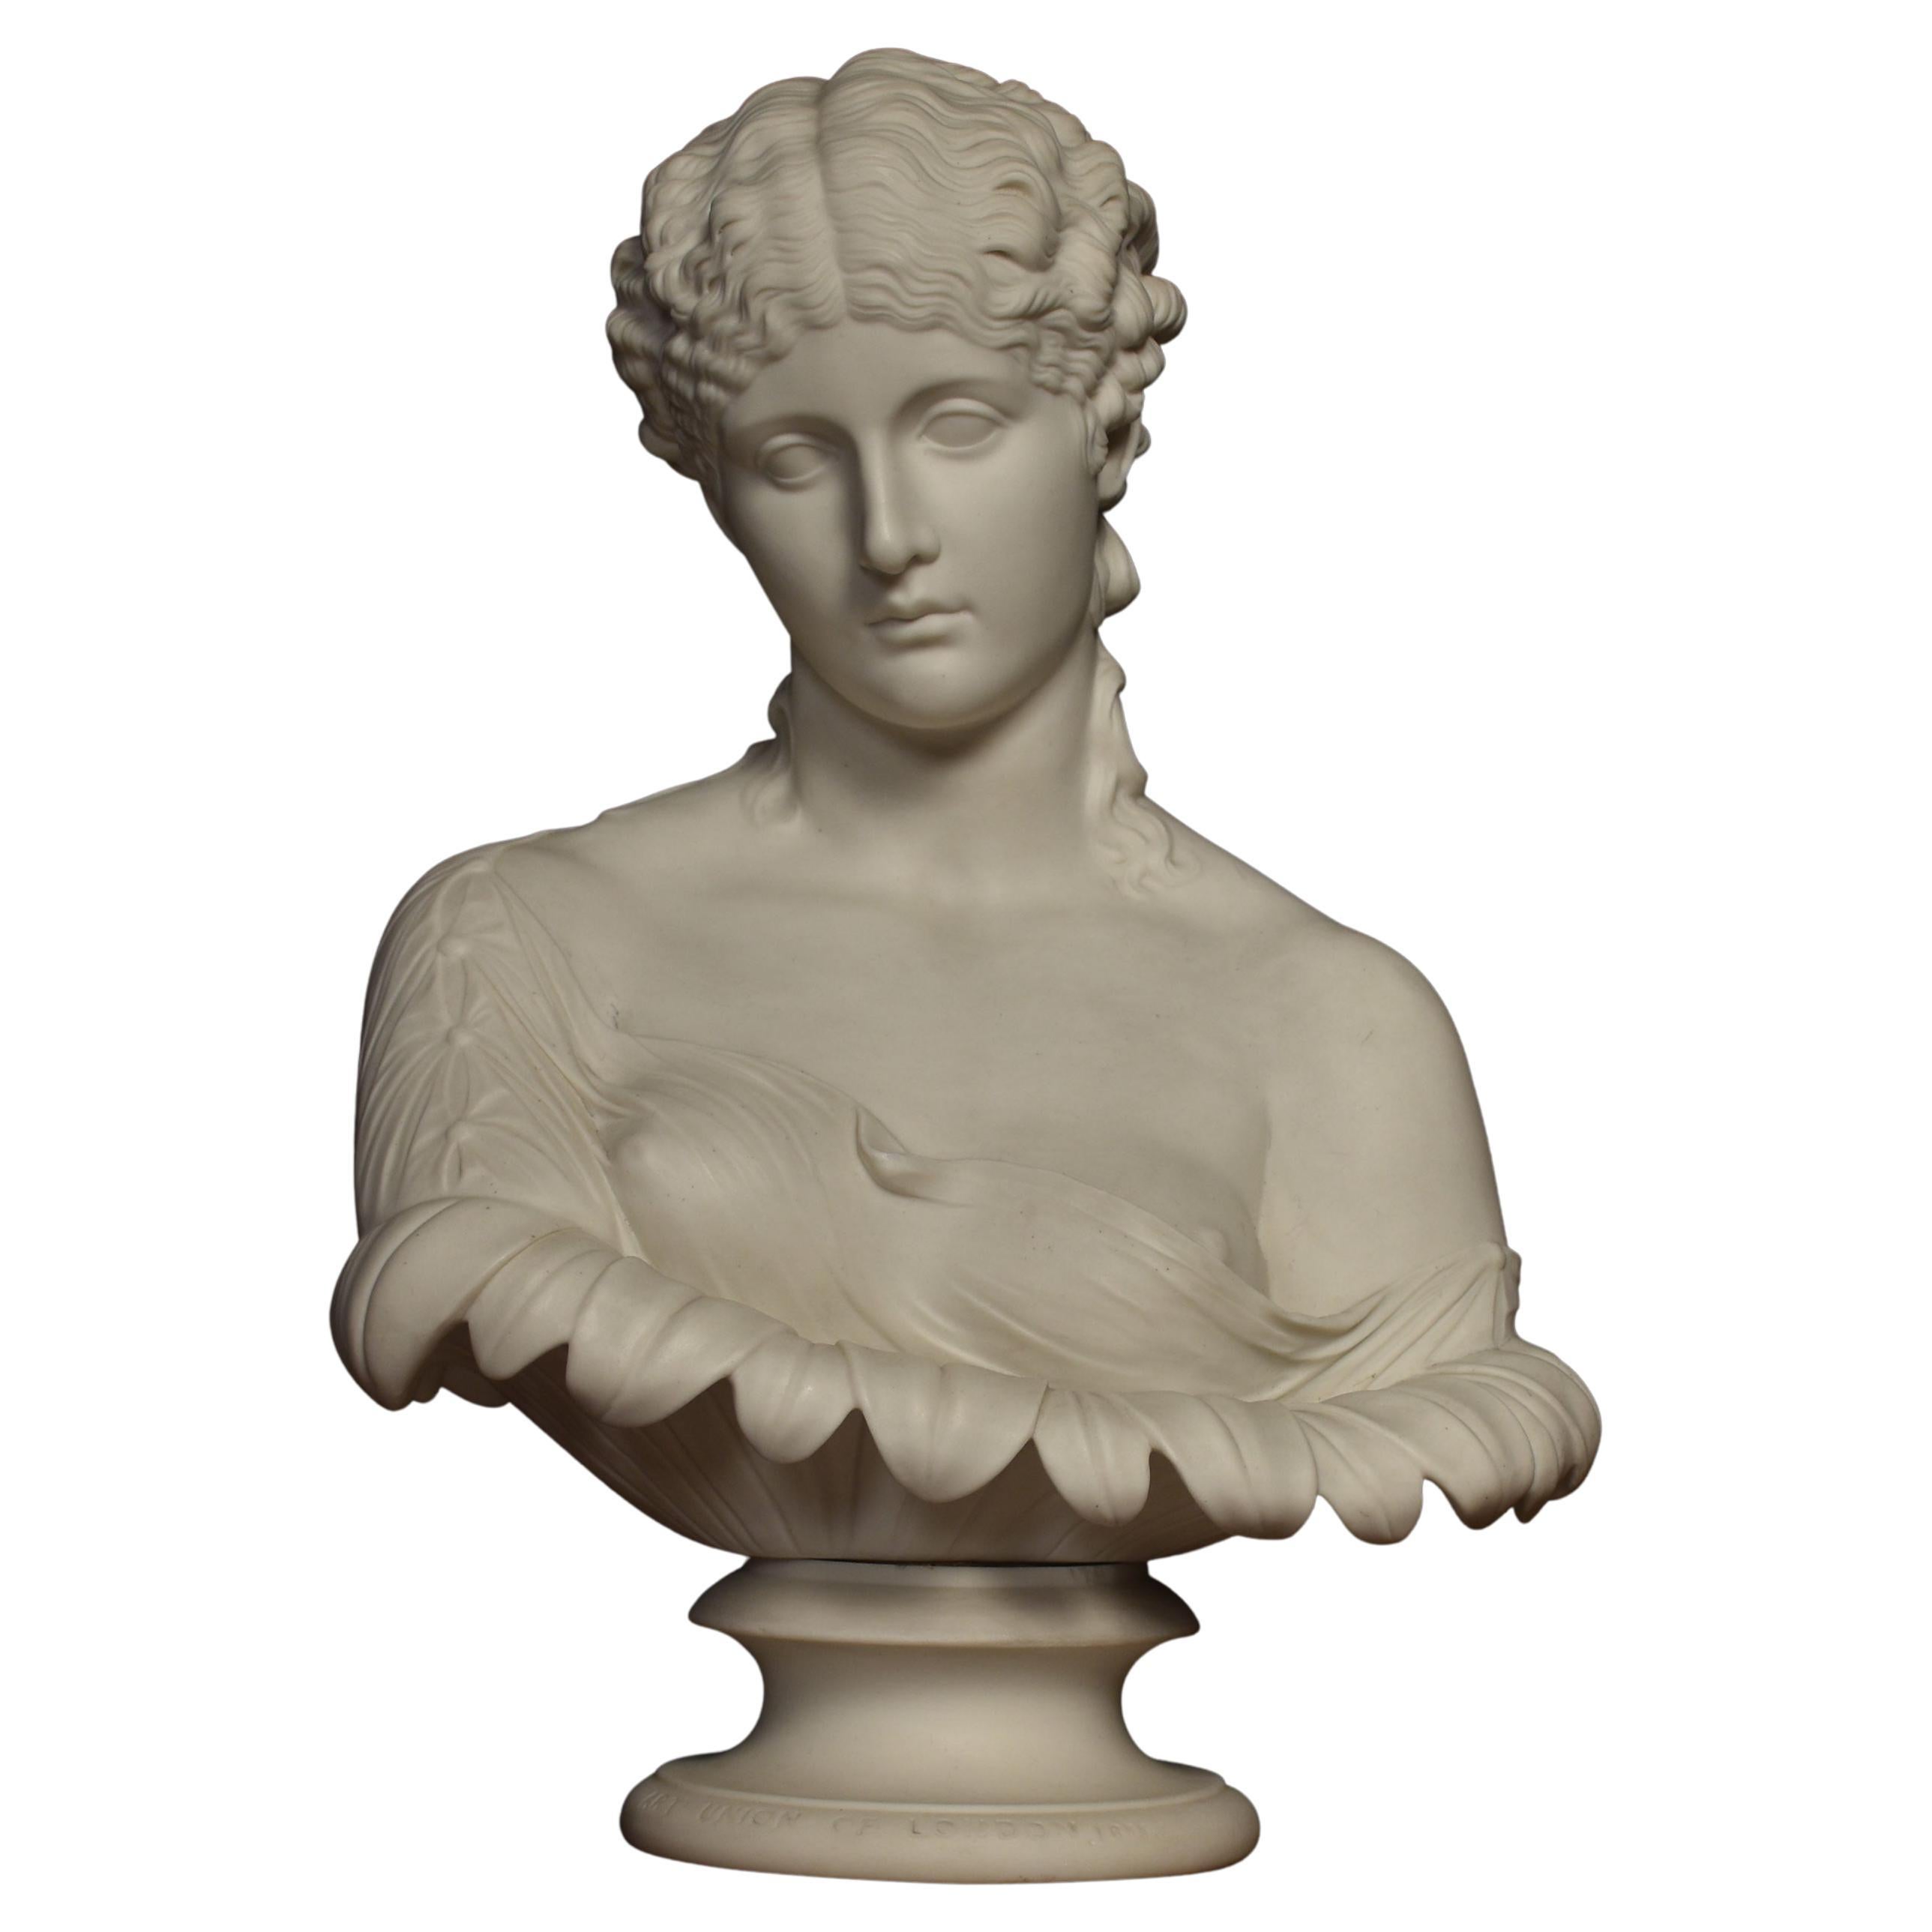 Large Art Union of London Bust of Clytie